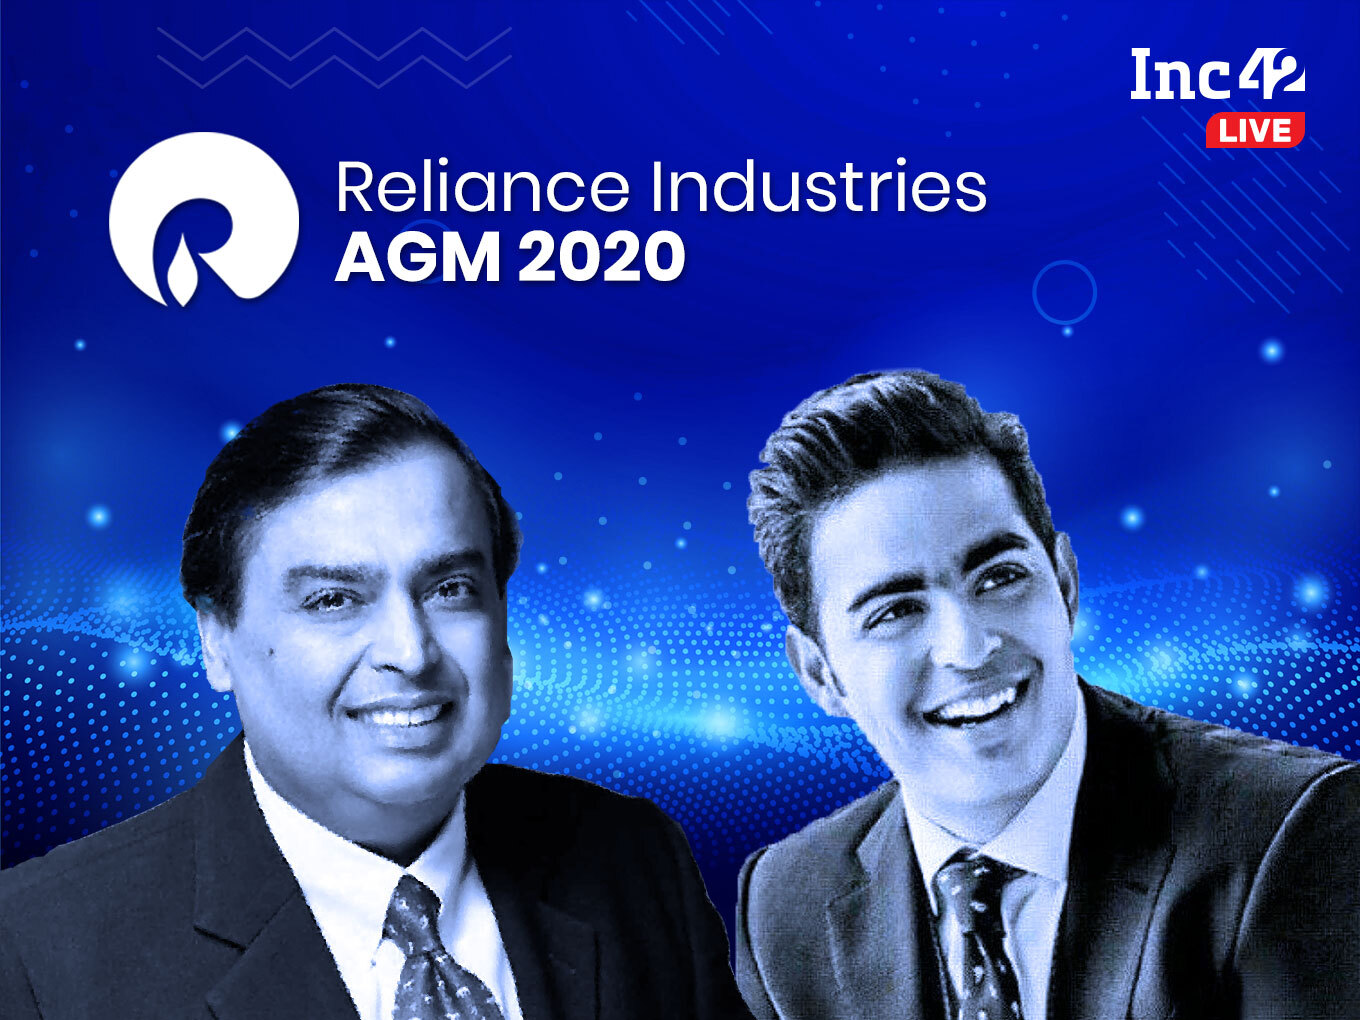 LIVE Reliance AGM 2020: Jio’s Digital Empire, New Launches, Partnerships And More